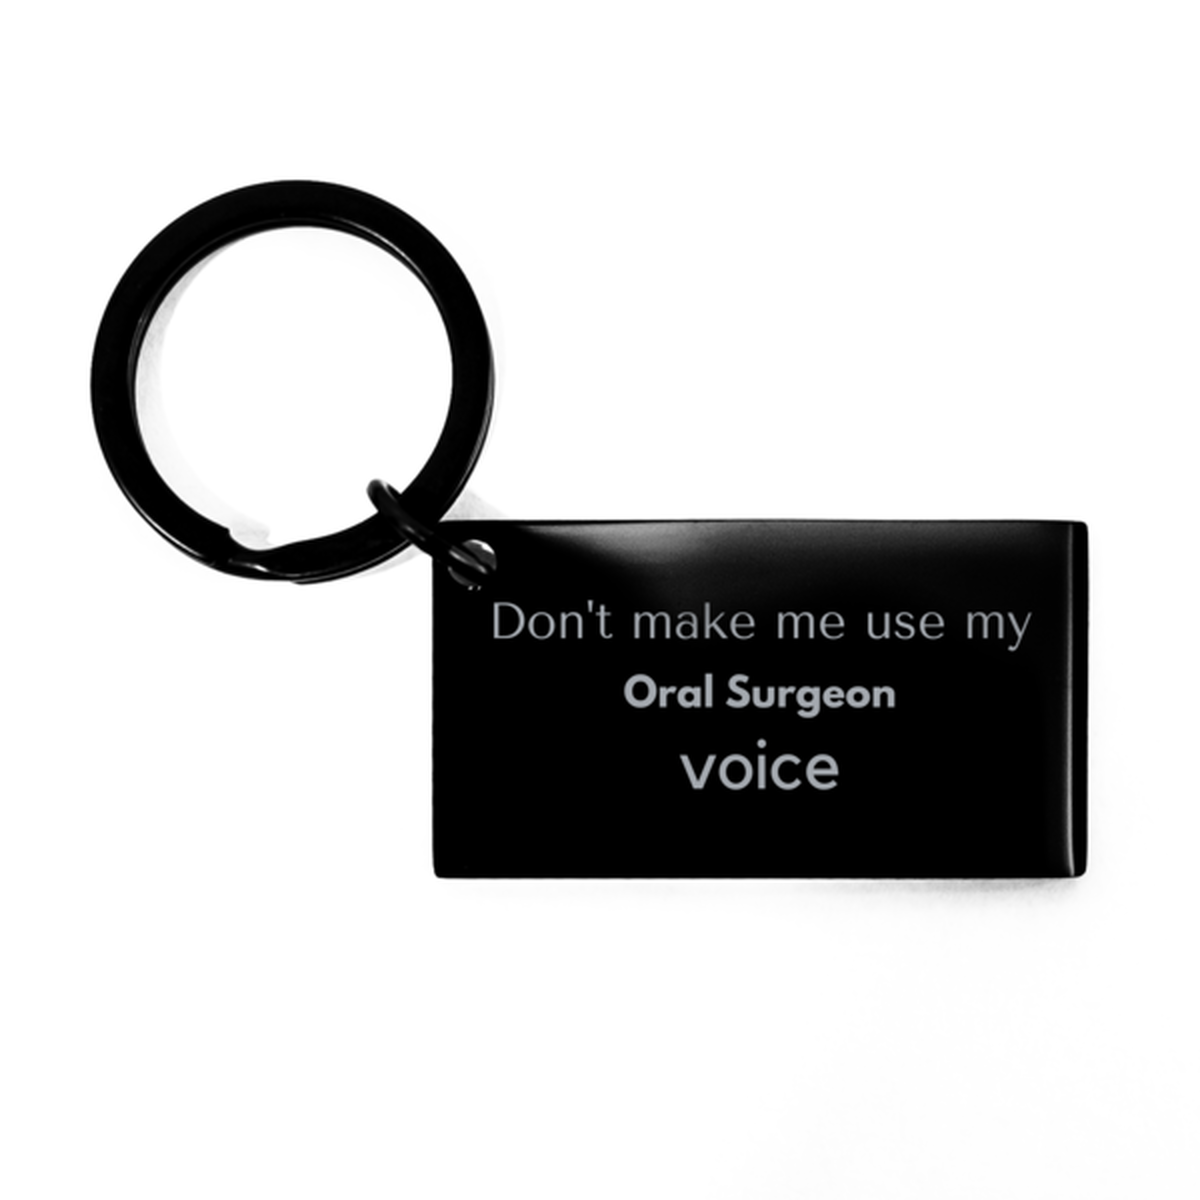 Don't make me use my Oral Surgeon voice, Sarcasm Oral Surgeon Gifts, Christmas Oral Surgeon Keychain Birthday Unique Gifts For Oral Surgeon Coworkers, Men, Women, Colleague, Friends